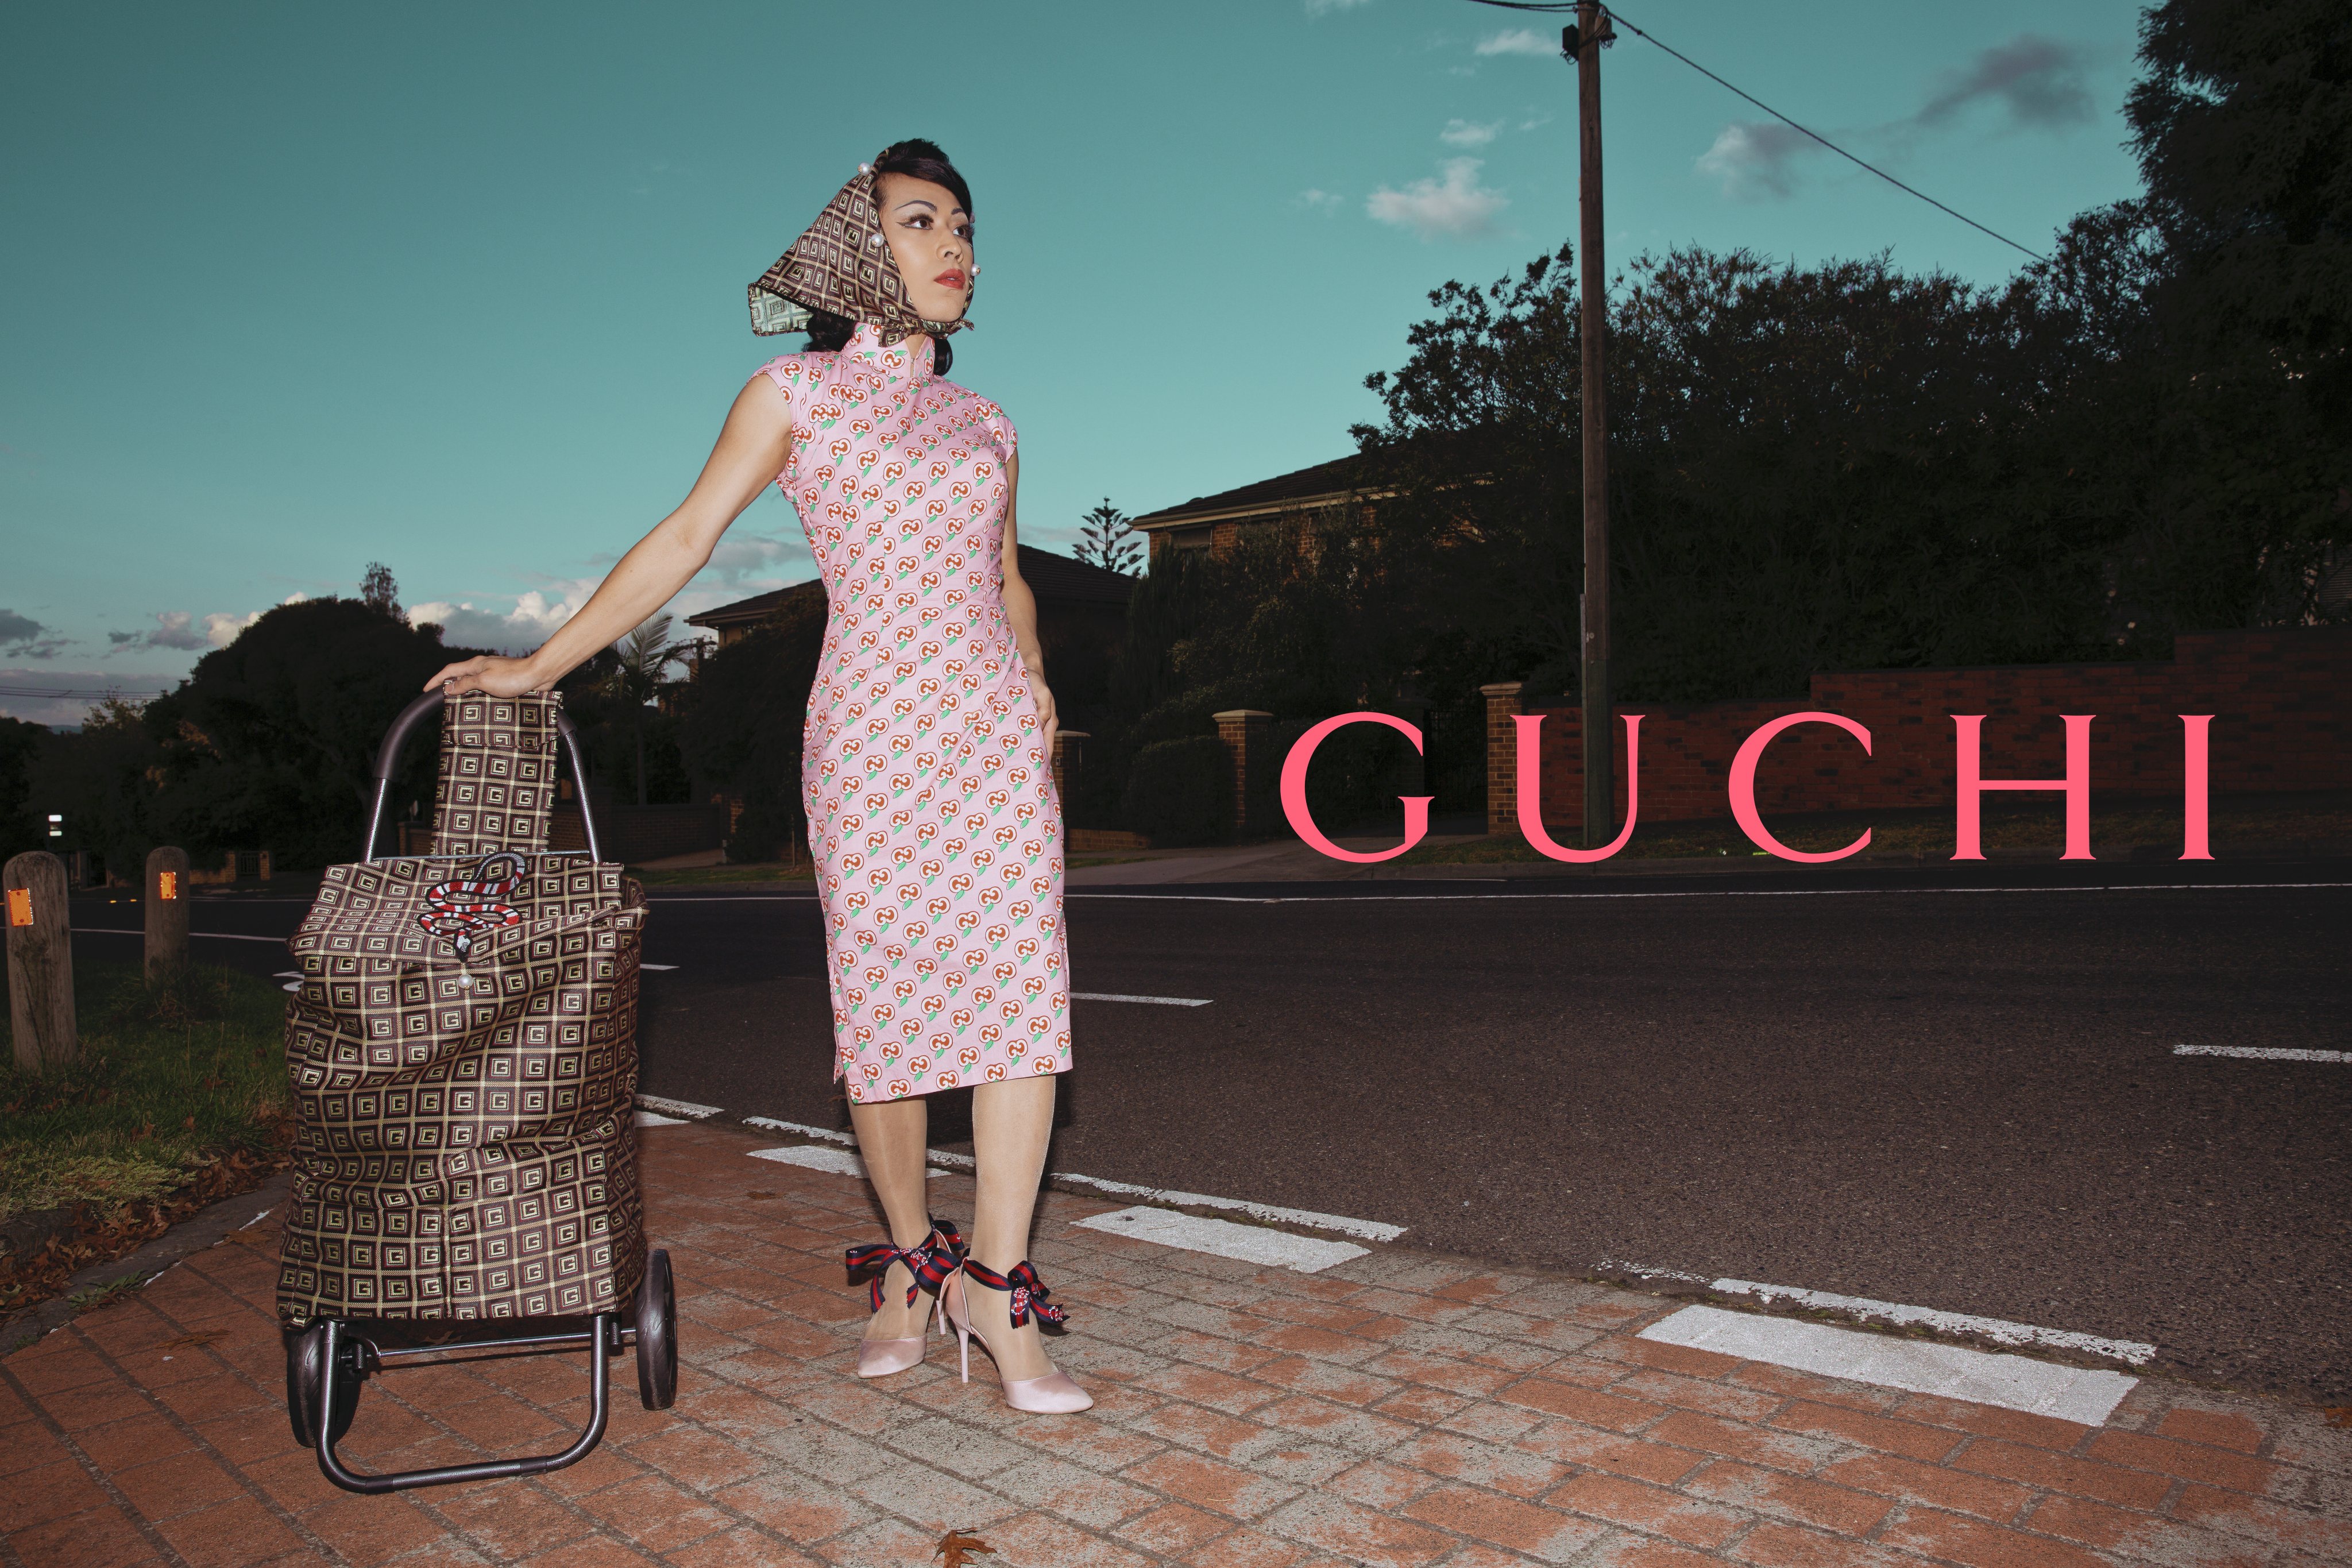 One of Scotty So’s mock luxury fashion campaigns featuring himself in a self-tailored cheongsam and a trolley bag covered in fake monograms that mimic those of leading fashion labels, part of his series “Hai KotTou, But Make It Fashion”. Photo: Courtesy of Scotty So